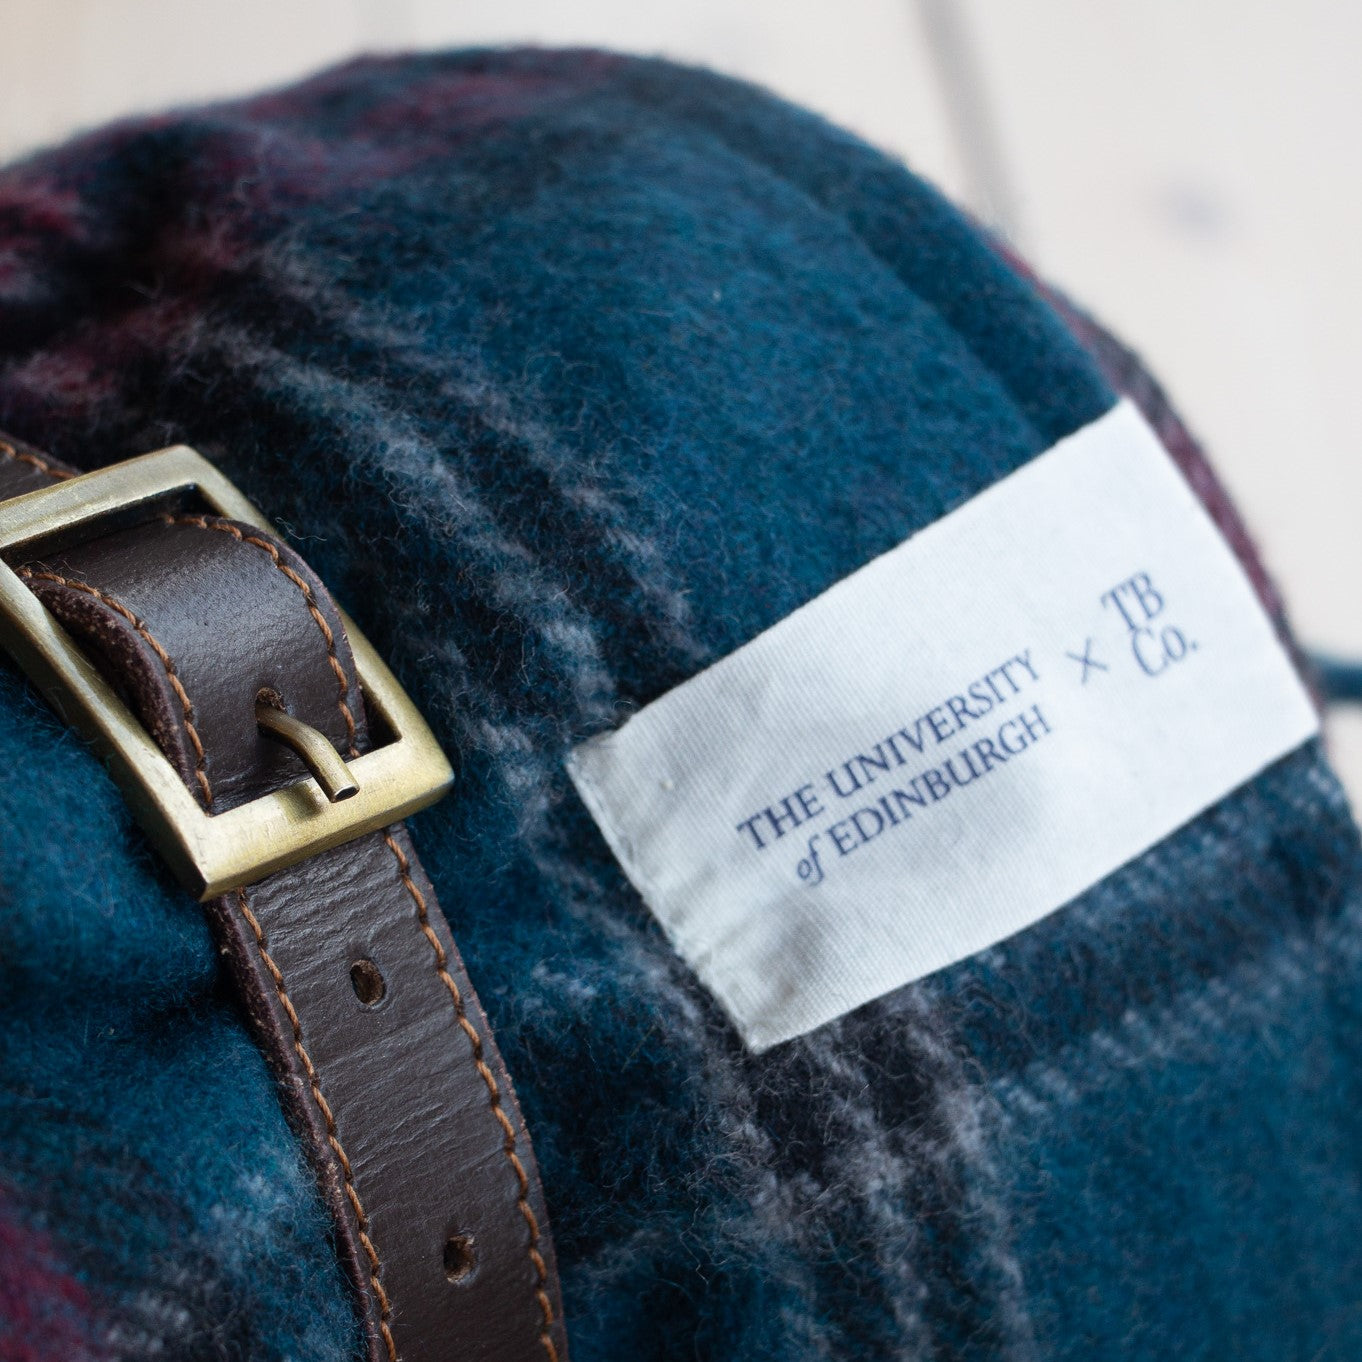 close of up university tartan picnic blanket with leather carrying strap and white 'the university of edinburgh x TBCo.' label